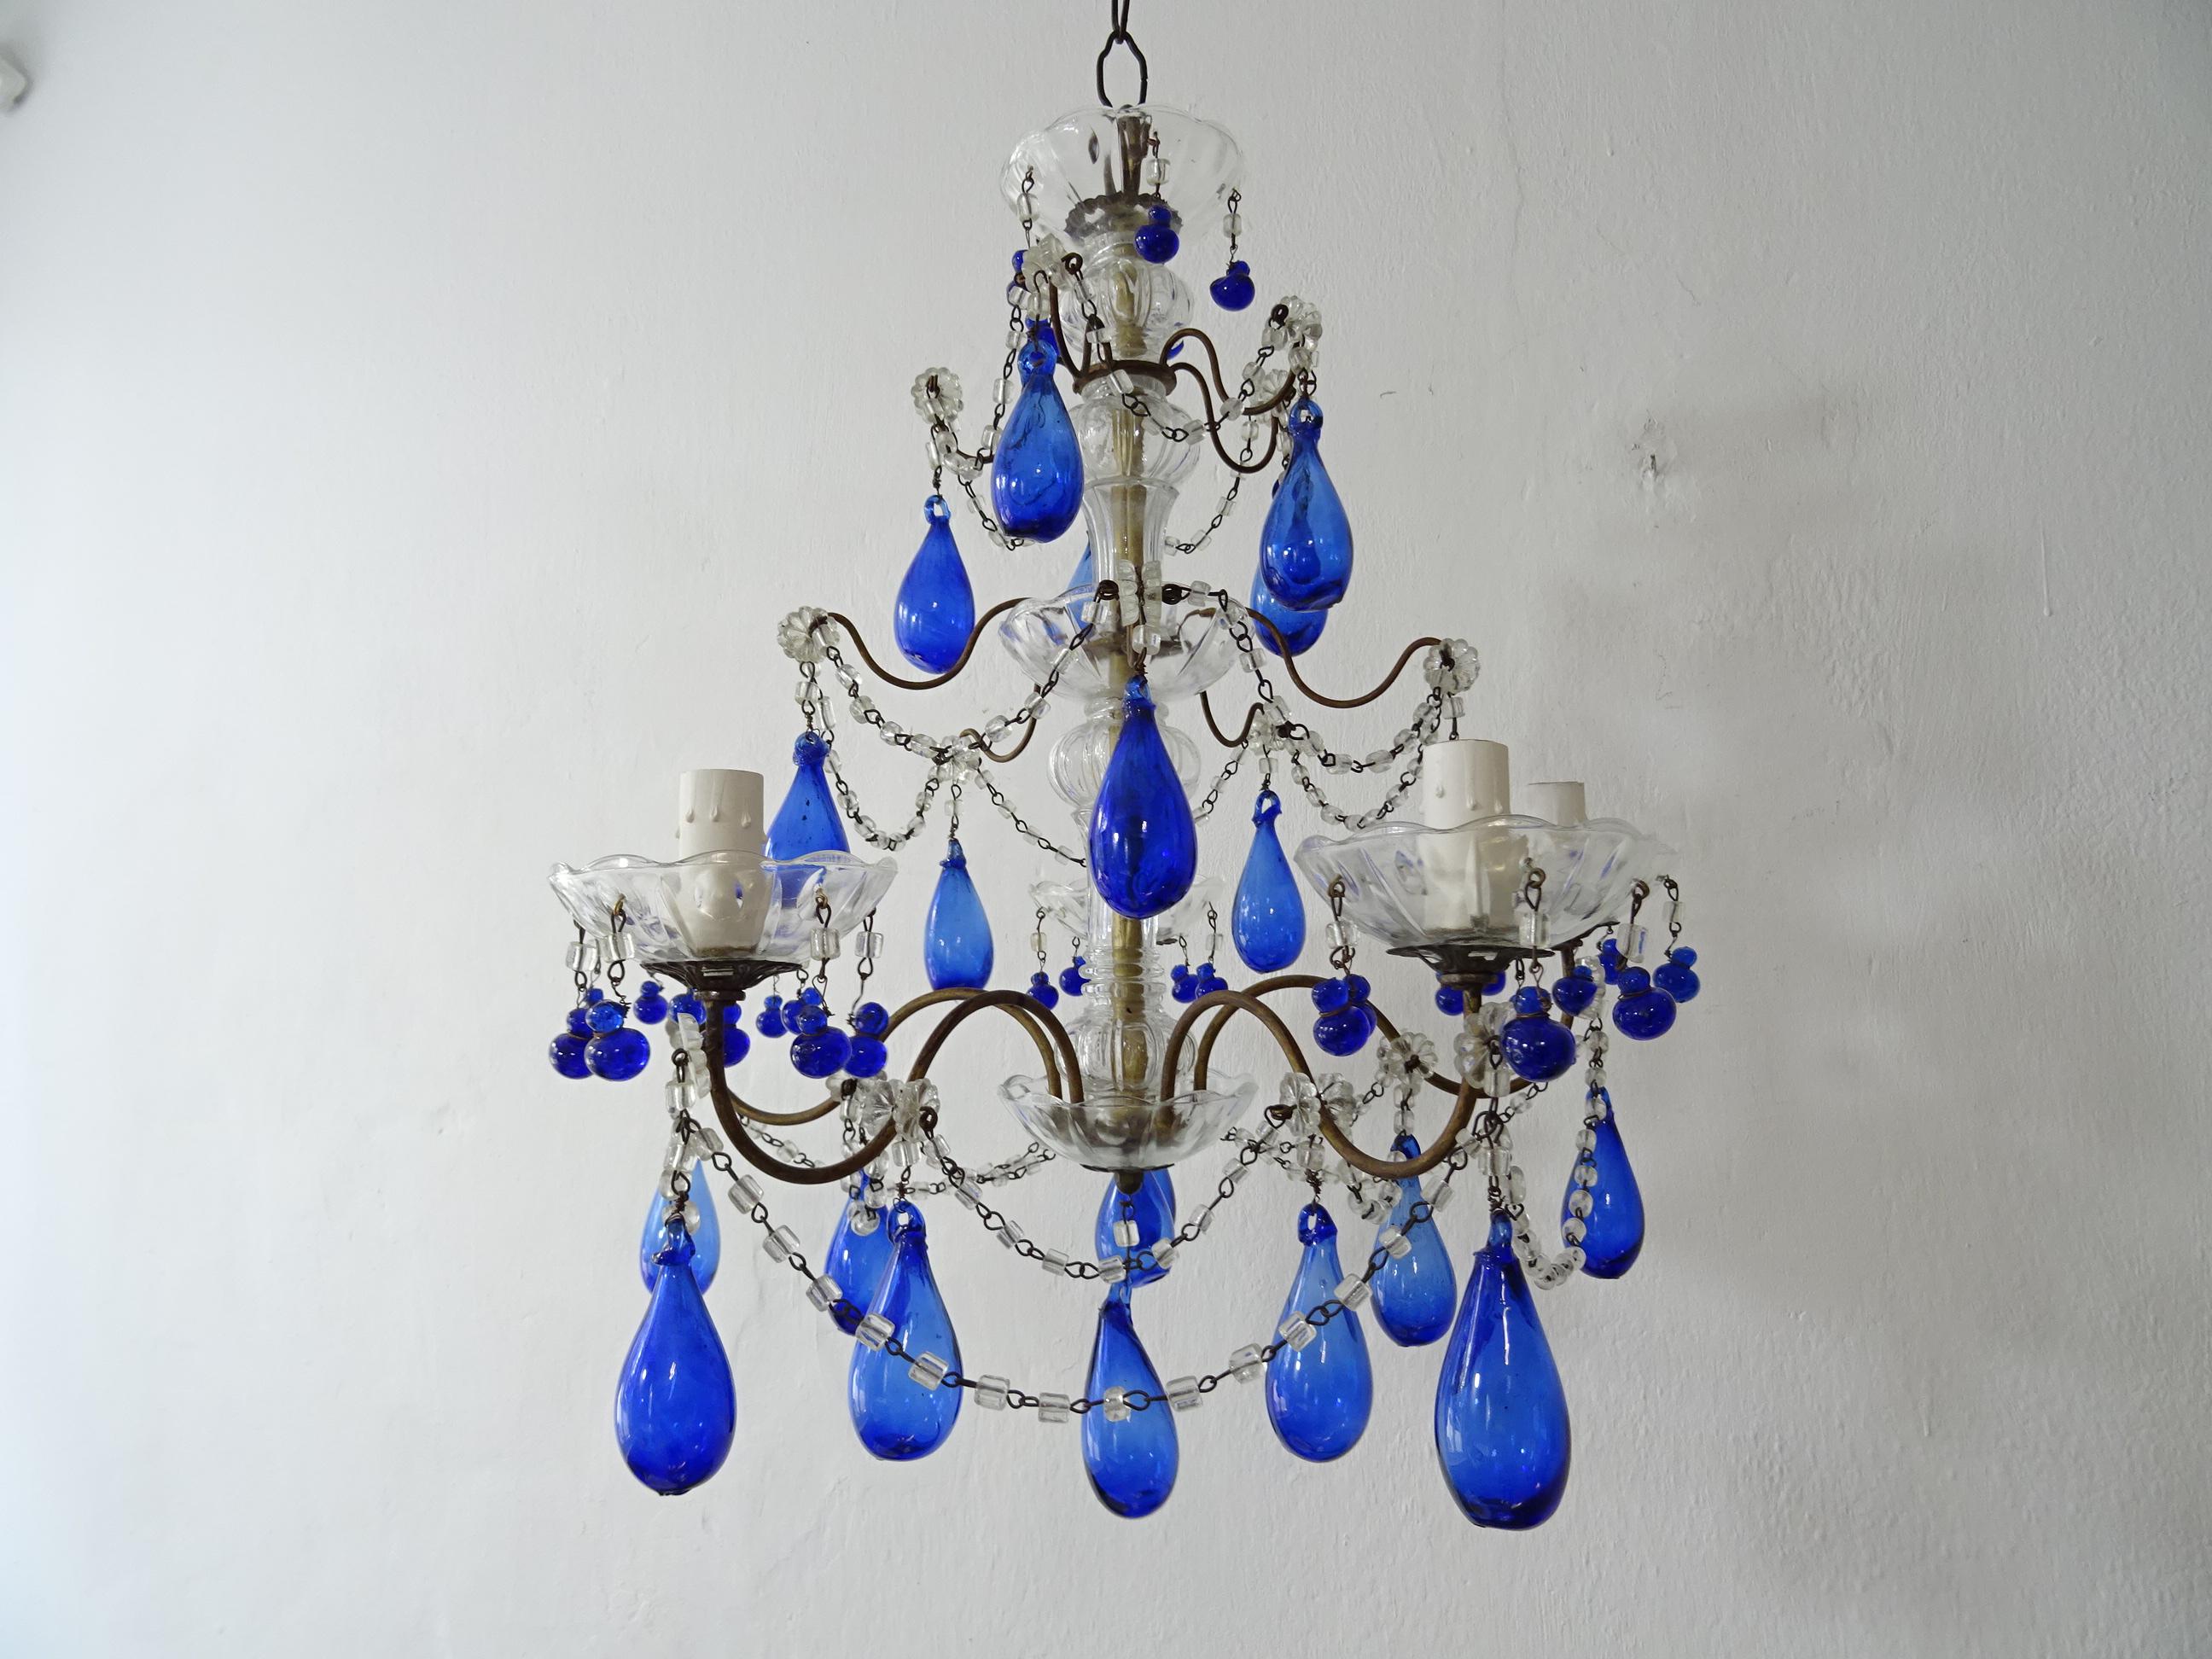 Housing 5 lights, sitting in crystal bobeches, dripping with vintage cobalt Murano glass tiny drops. This chandelier will be rewired with certified UL US sockets for the United States and appropriate sockets for all other countries and ready to